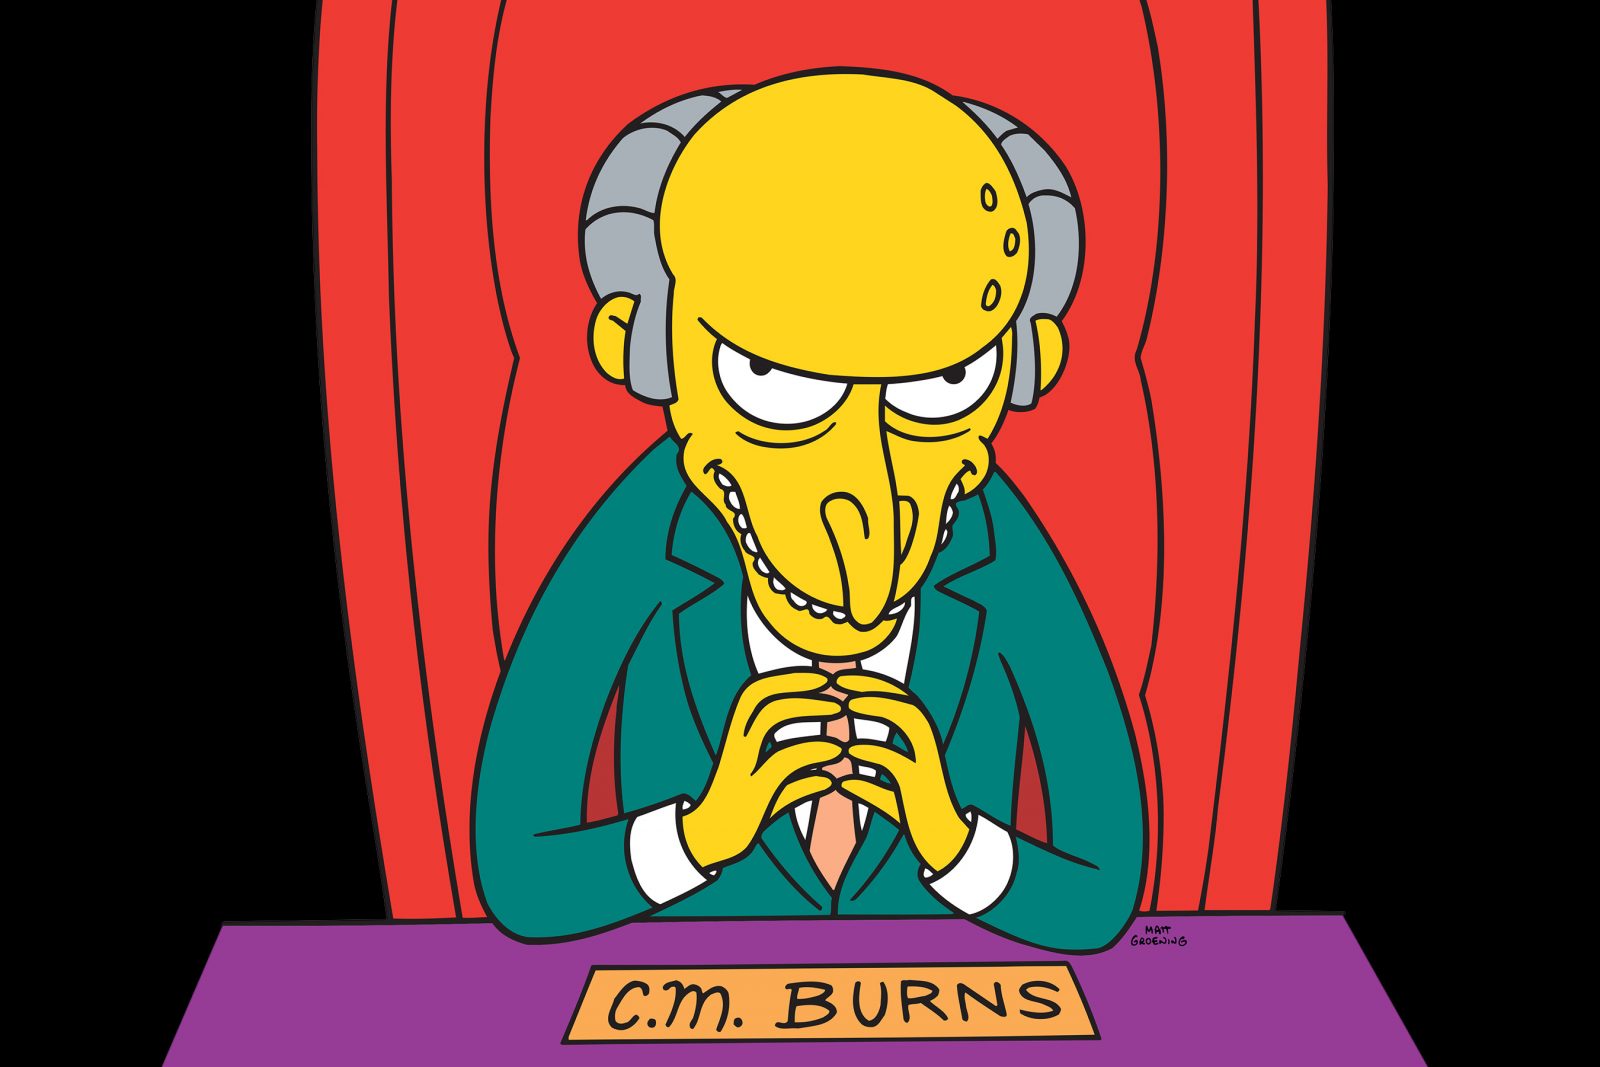 Fake Nerds Can Only Score 6/15 on This Quiz, But Real Nerds Can Score 12/15 Simp Mr Burns 3 Hires2